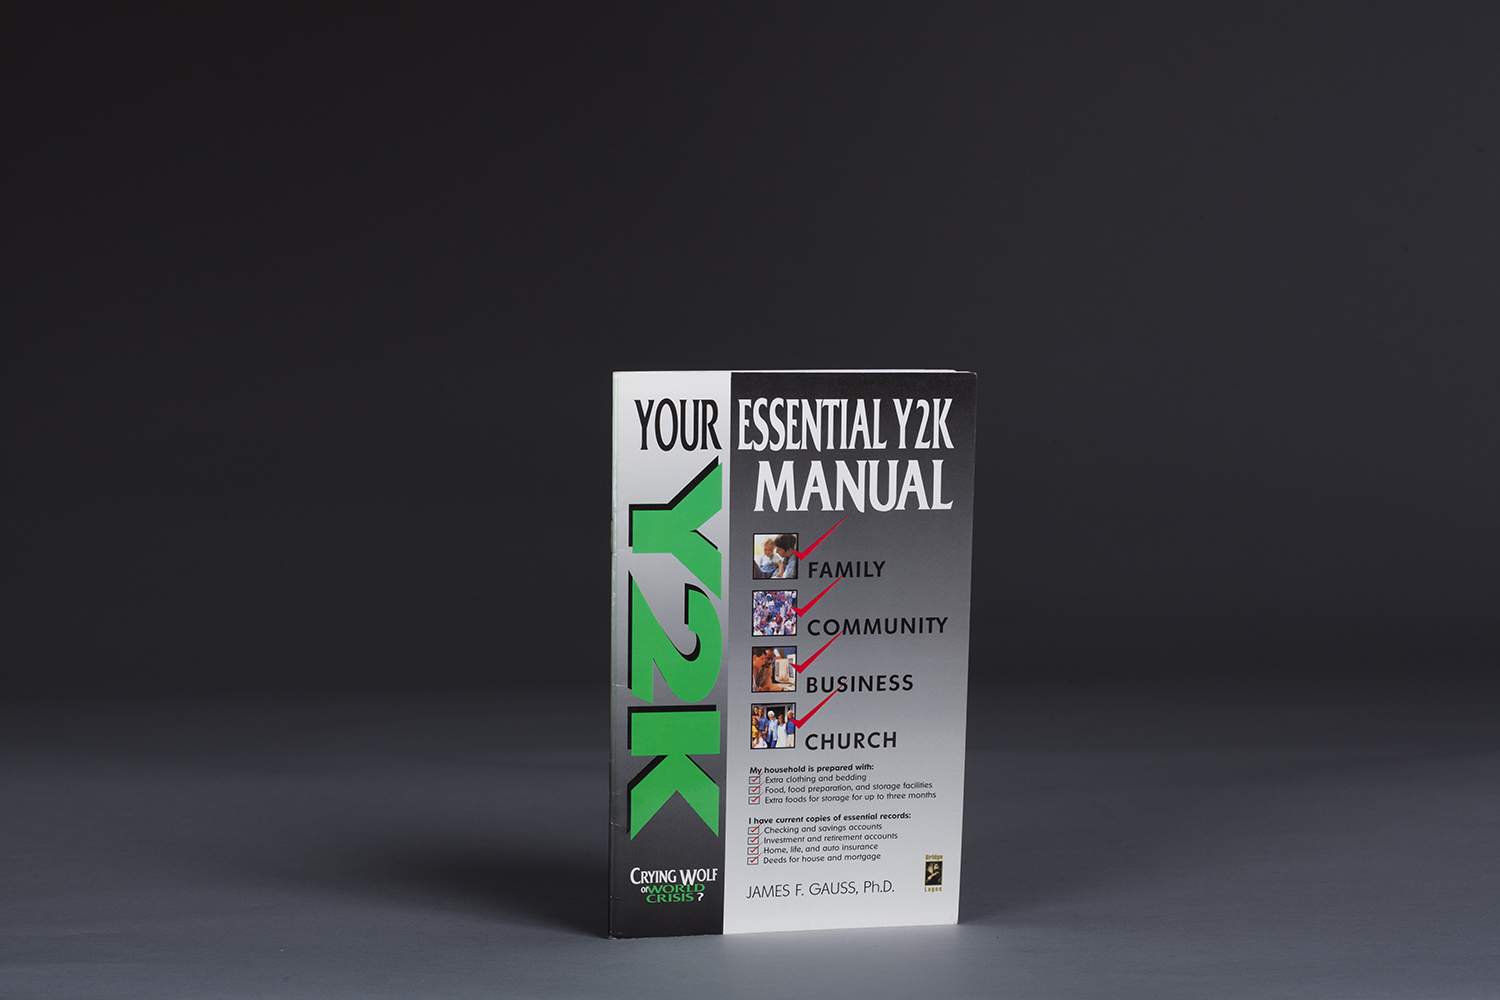 Your Essential Y2K Manual - 9976 Cover.jpg